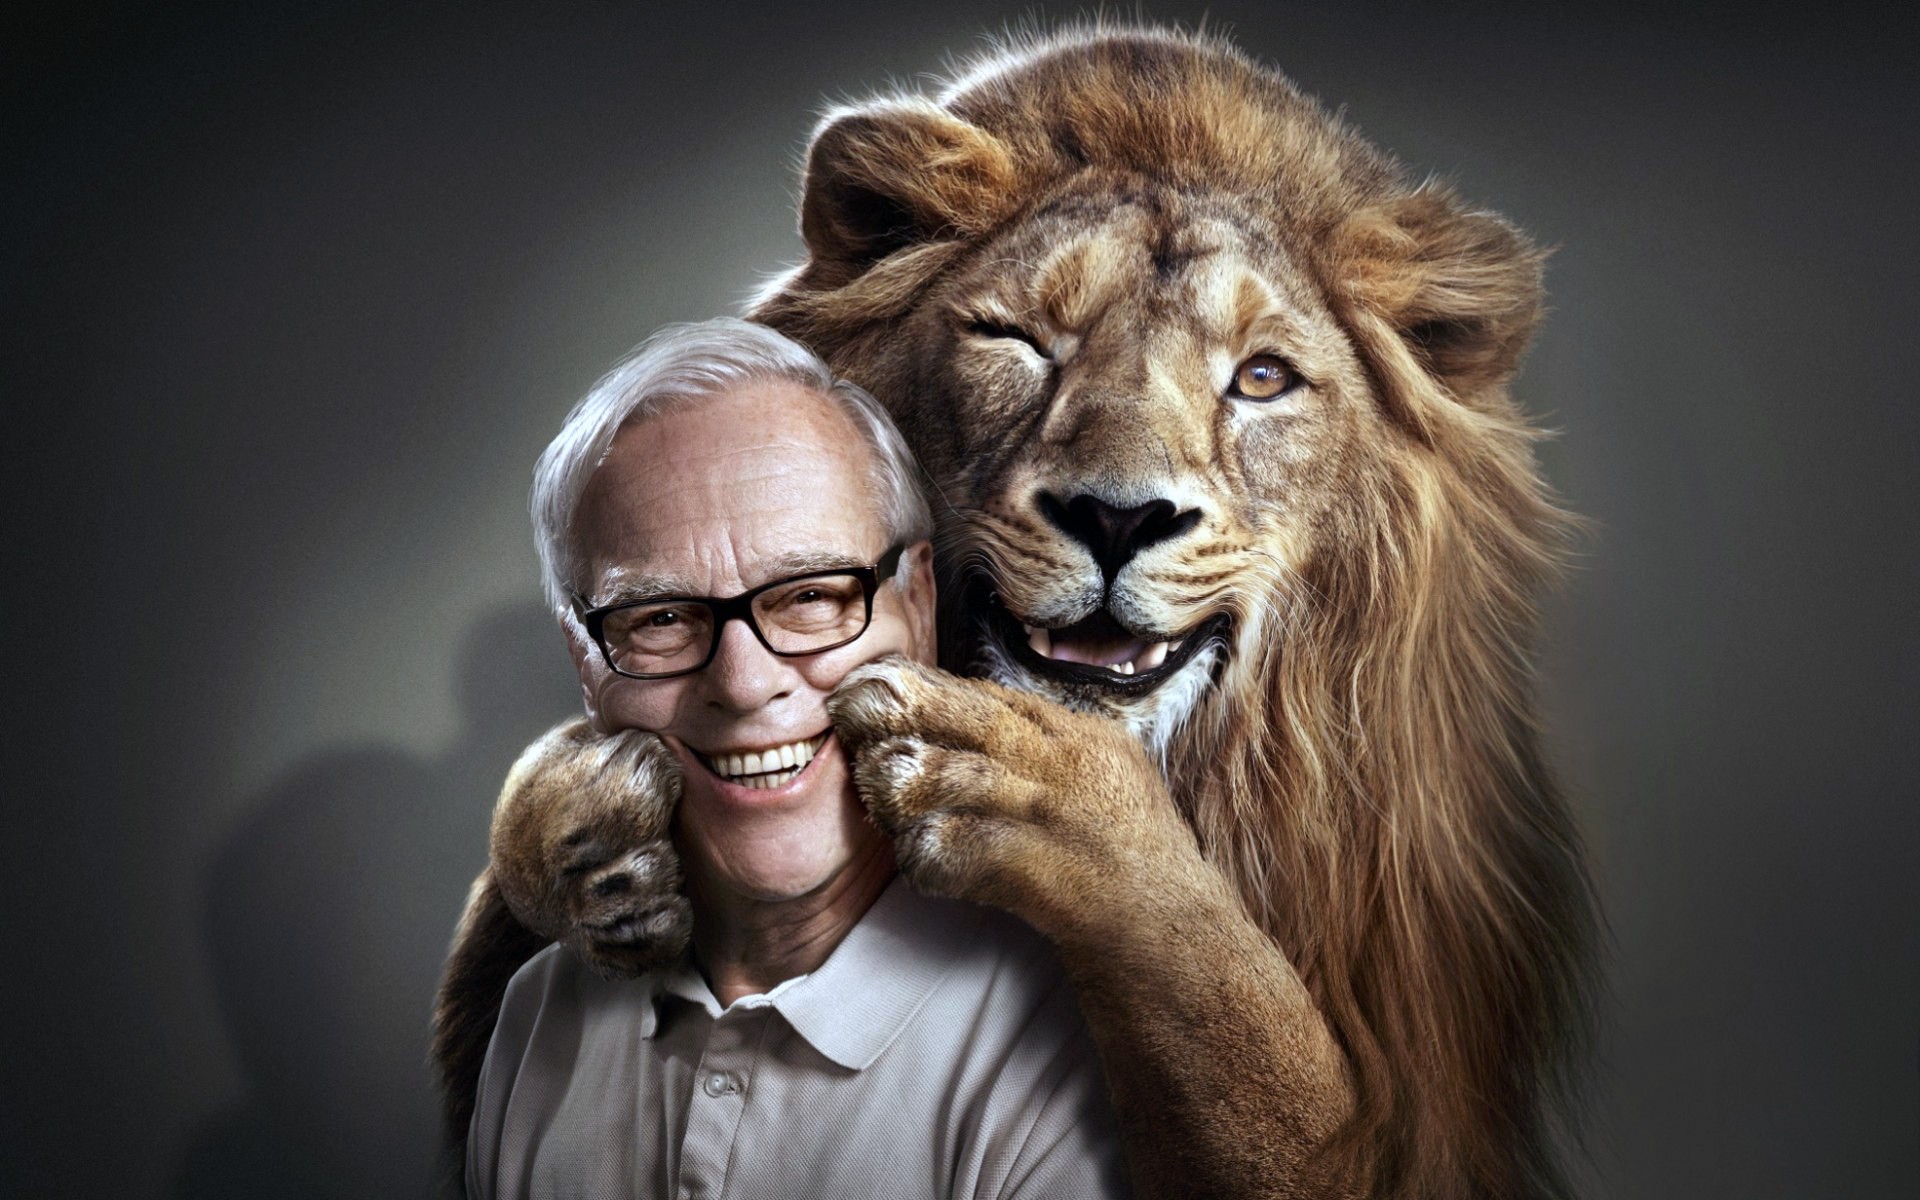 General 1920x1200 nature animals old people men lion smiling photo manipulation gray background glasses humor big cats mammals